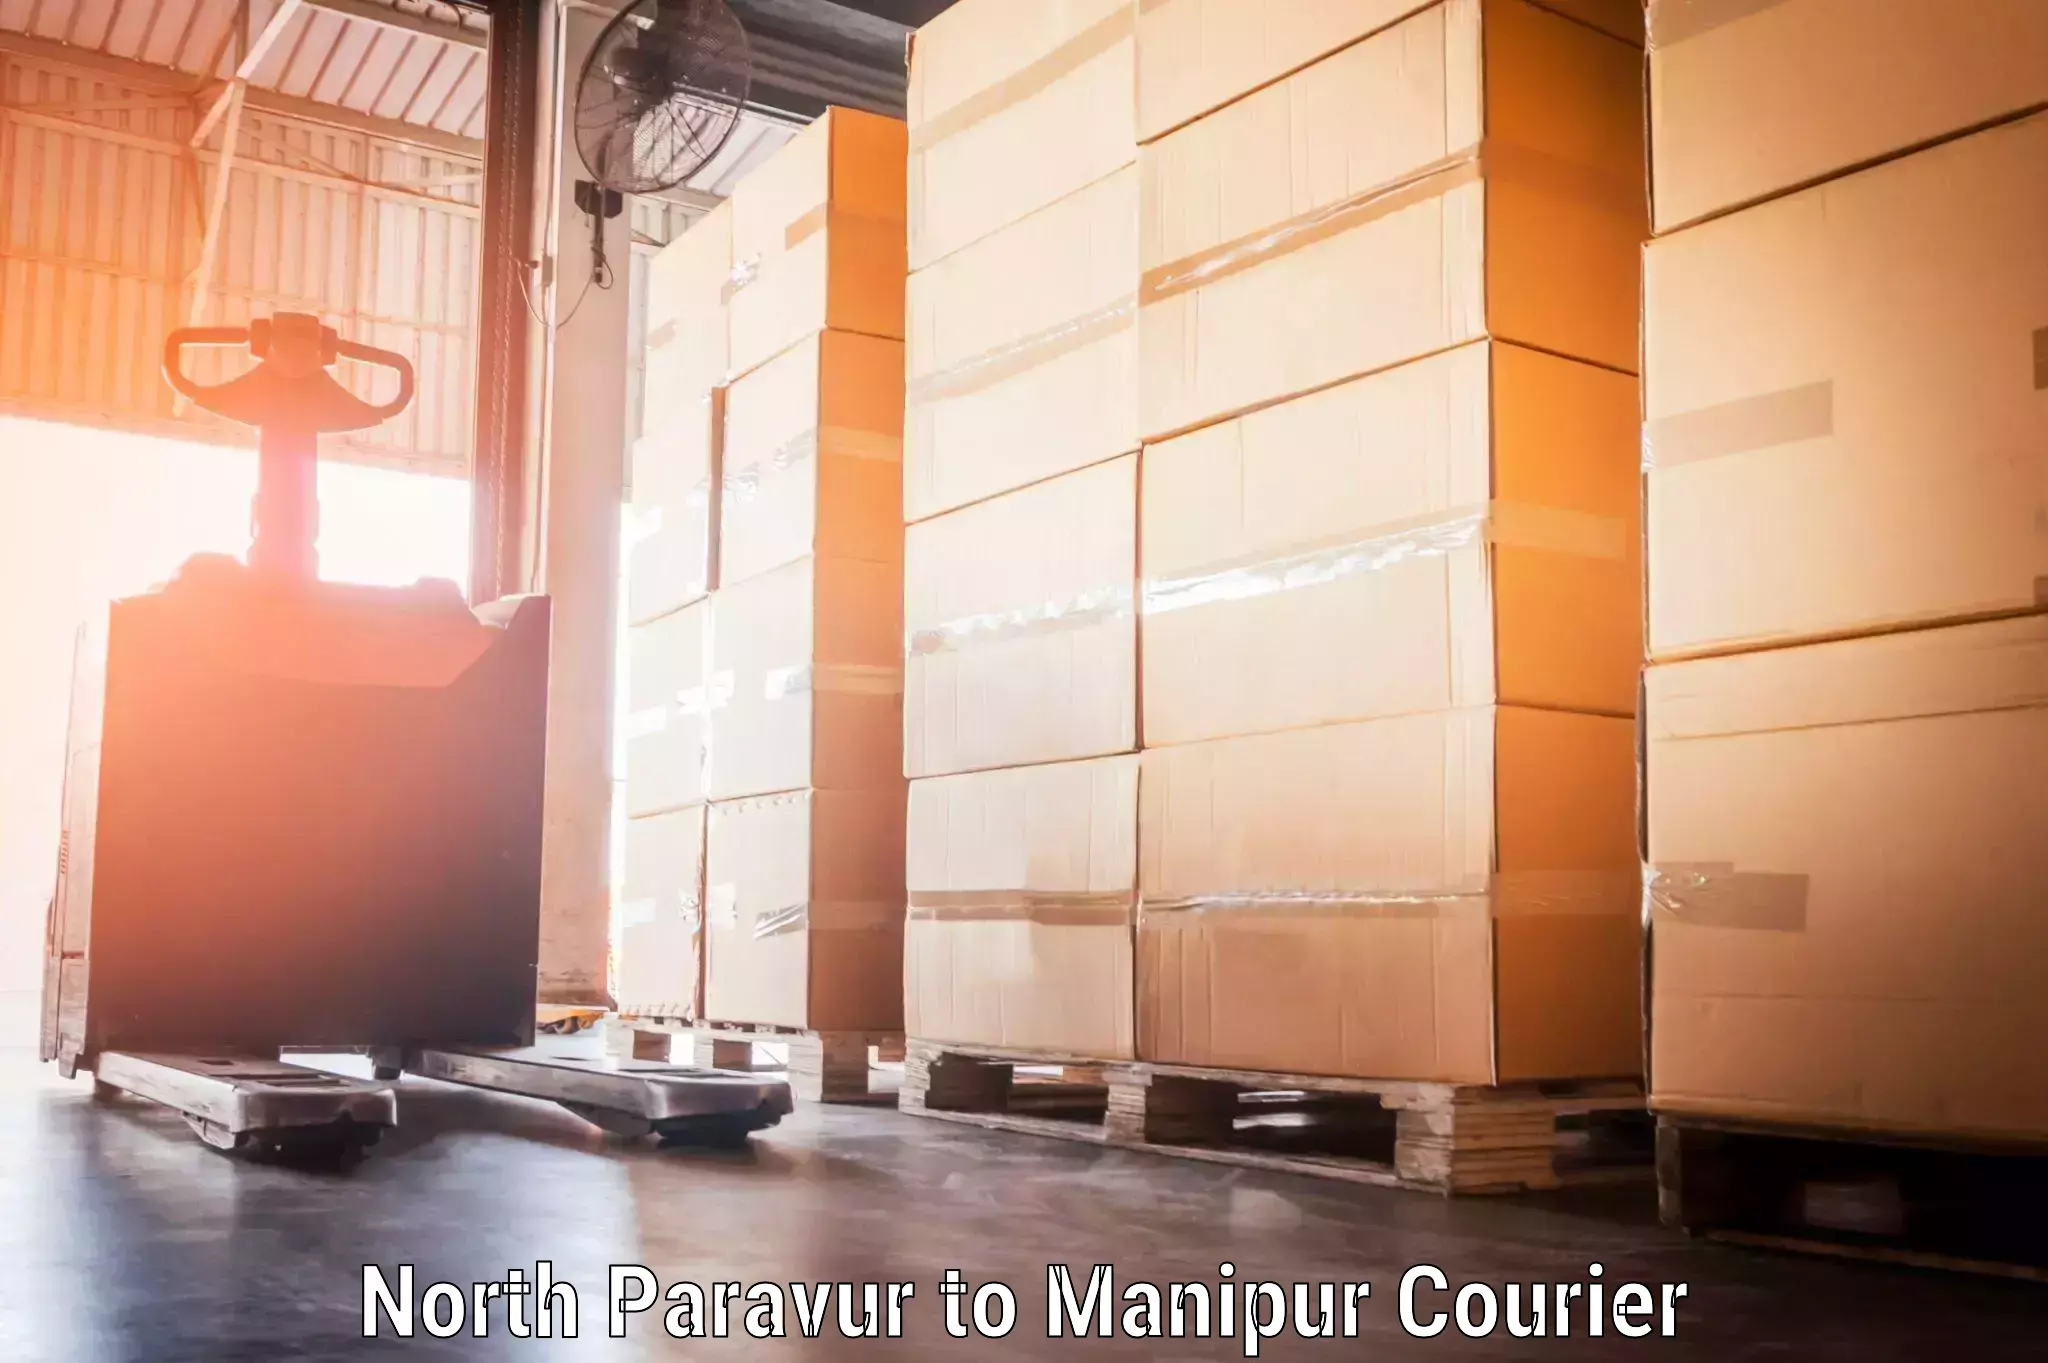 Baggage transport innovation North Paravur to Manipur